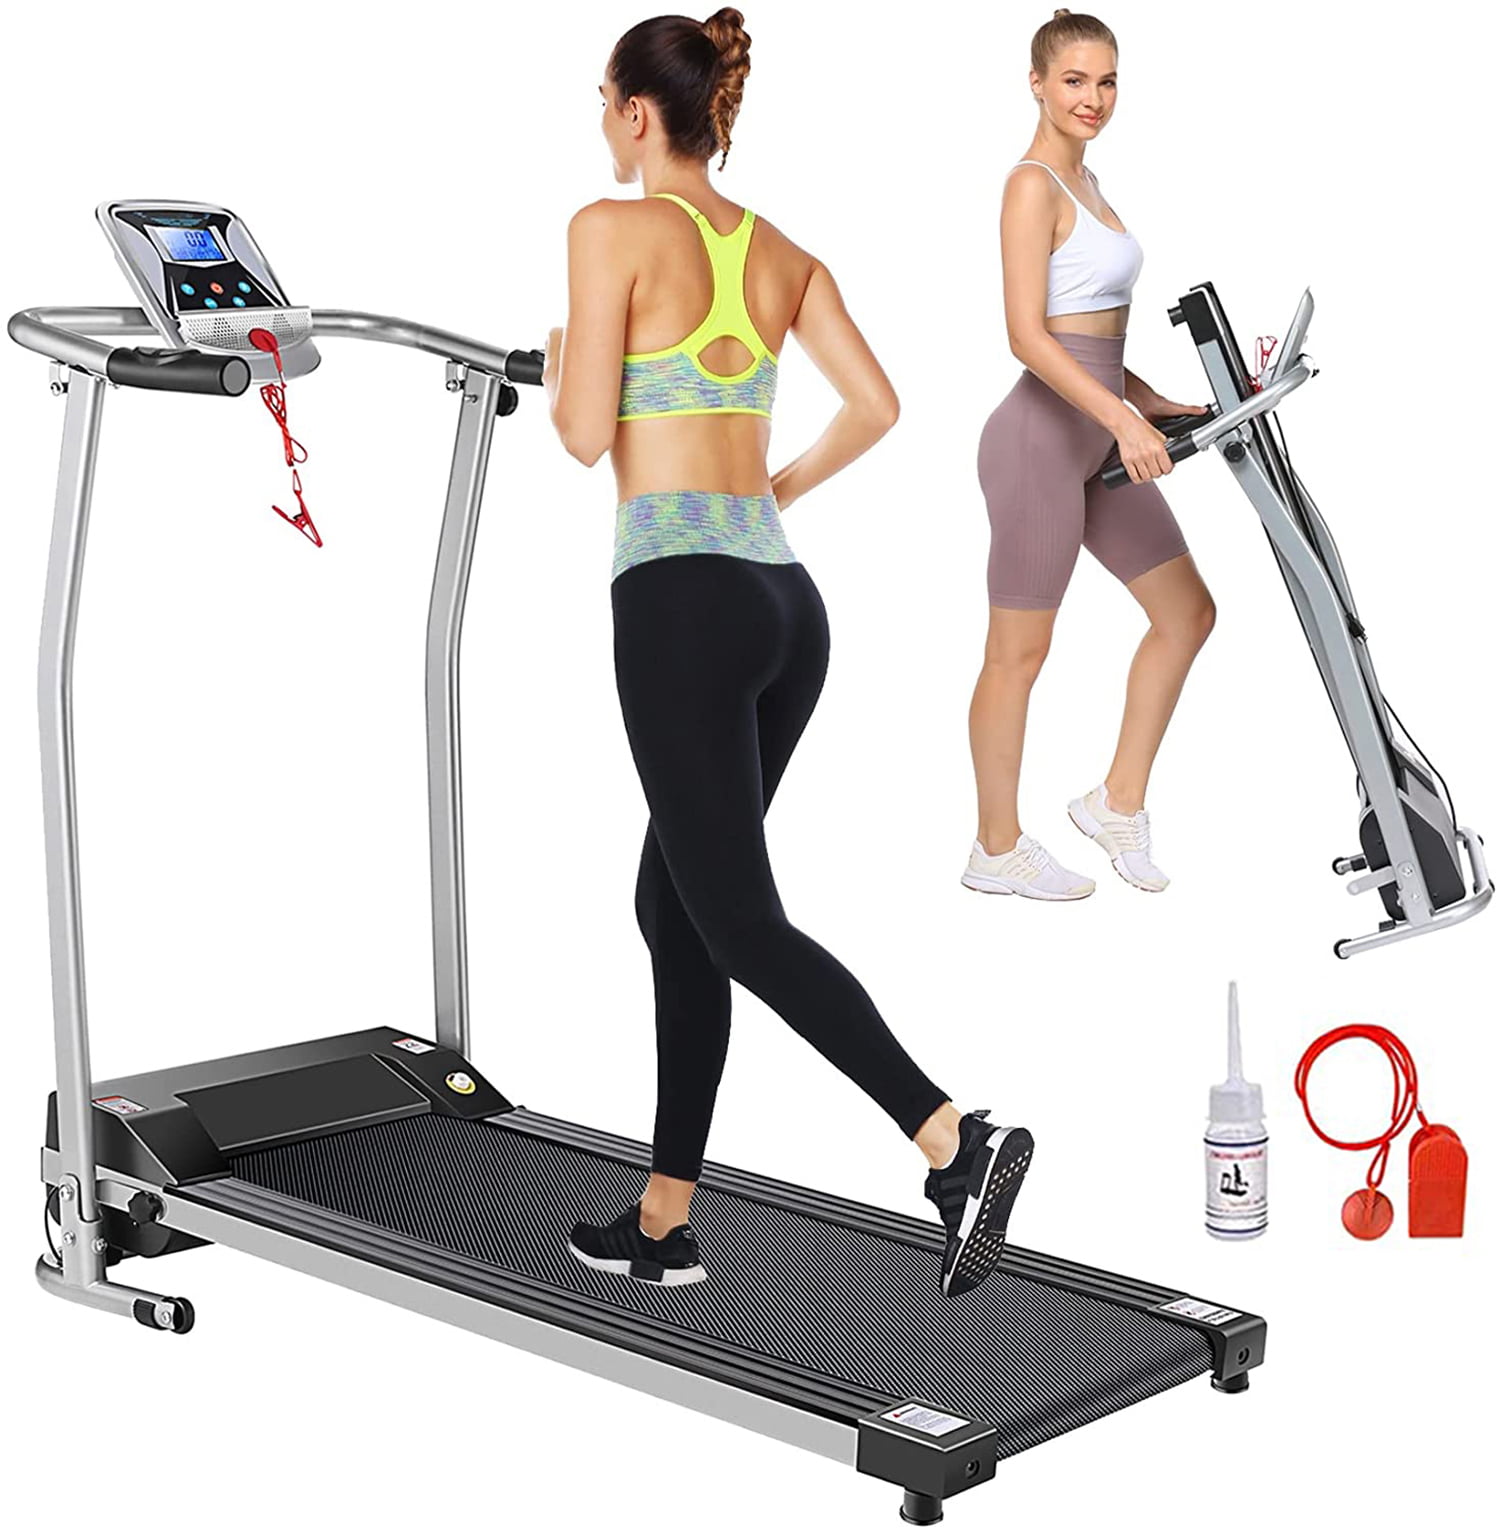 ANCHEER Folding Treadmill Walking Jogging Running Machine Trainer Equipment for Home & Office Workout Indoor Exercise Machine Electric Motorized Treadmill with LCD Monitor 